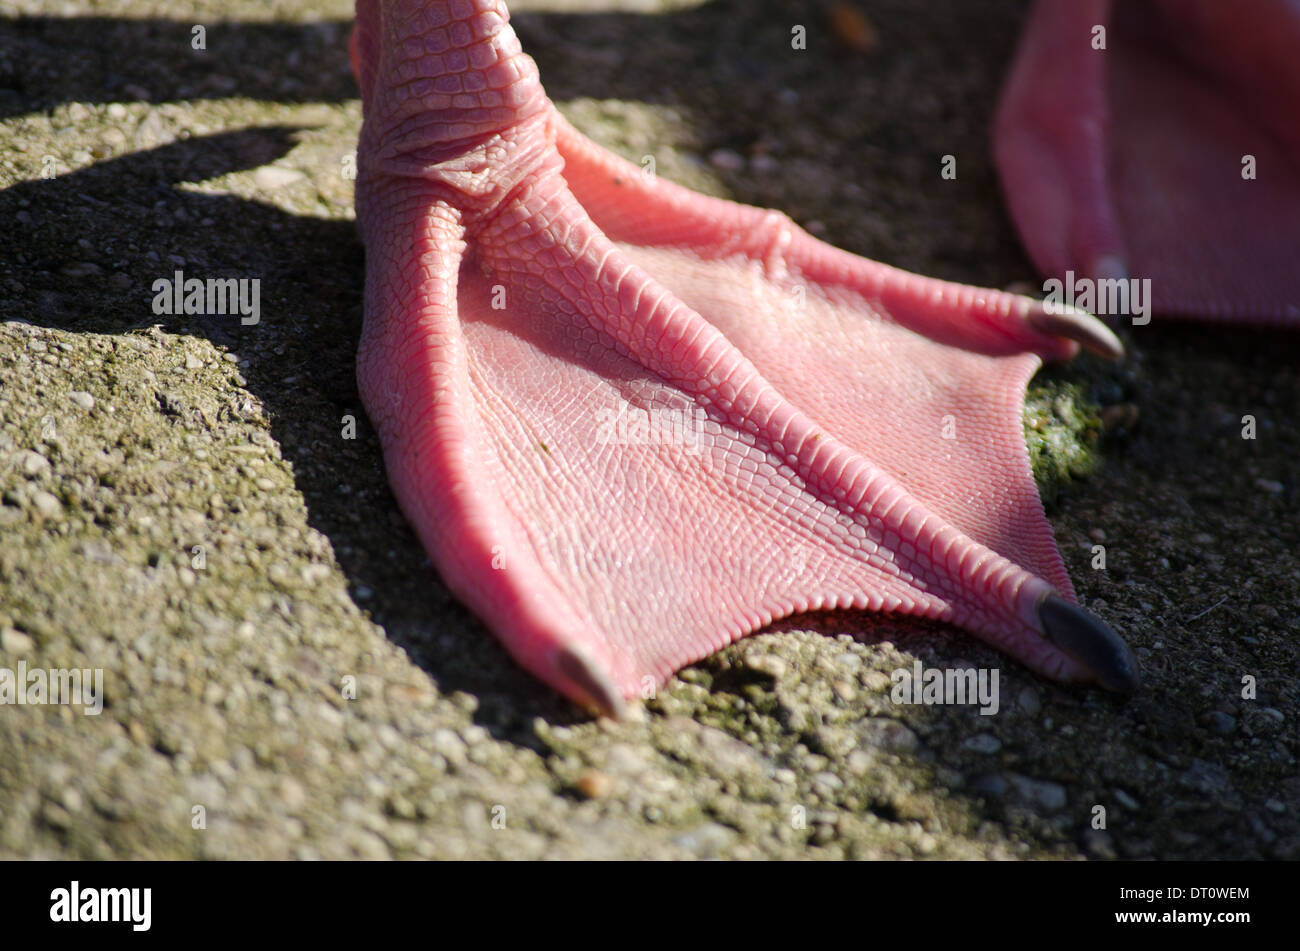 Duck's foot showing webbed toes Stock Photo